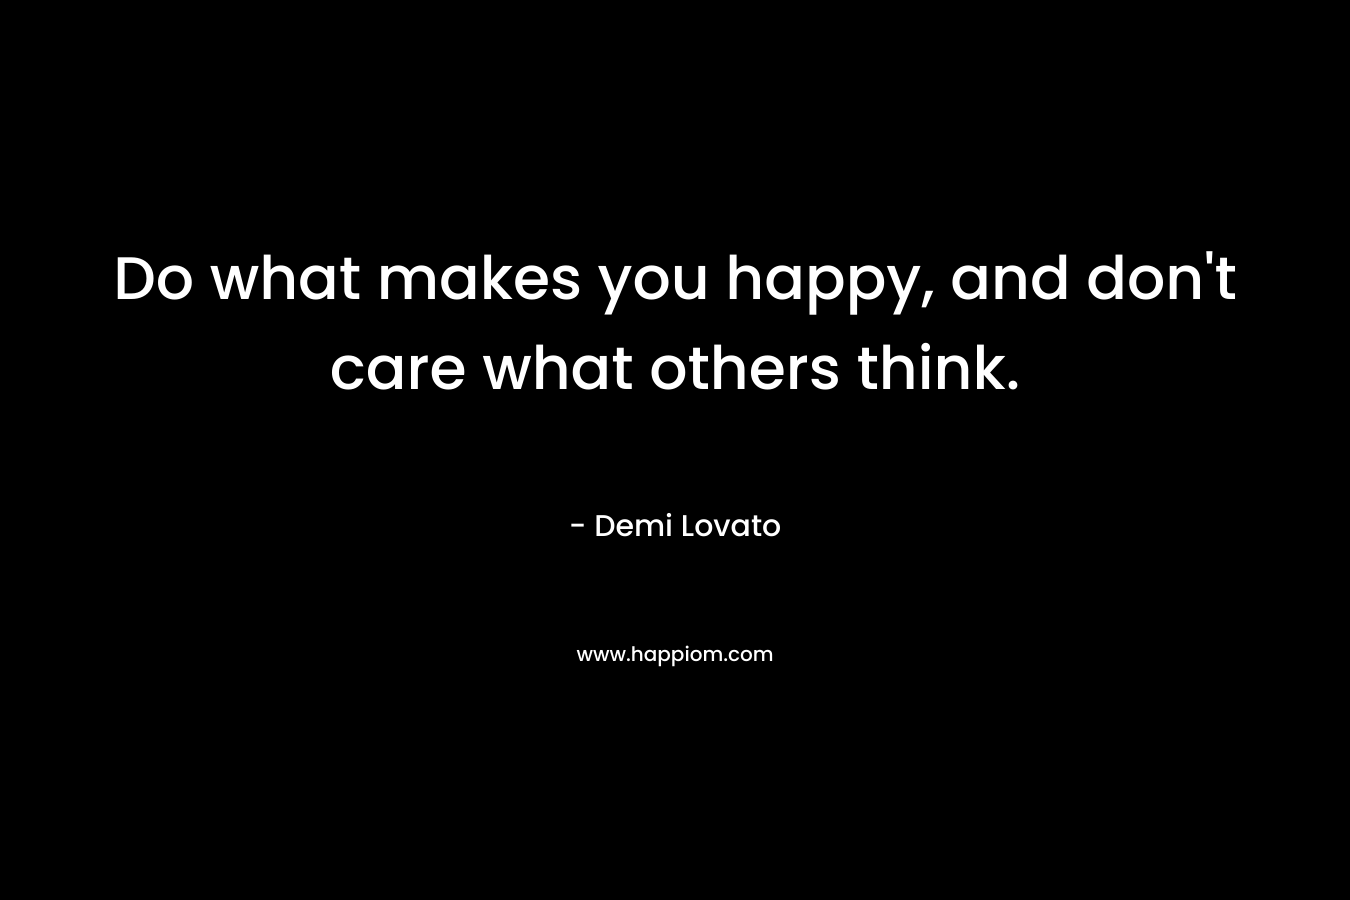 Do what makes you happy, and don't care what others think.